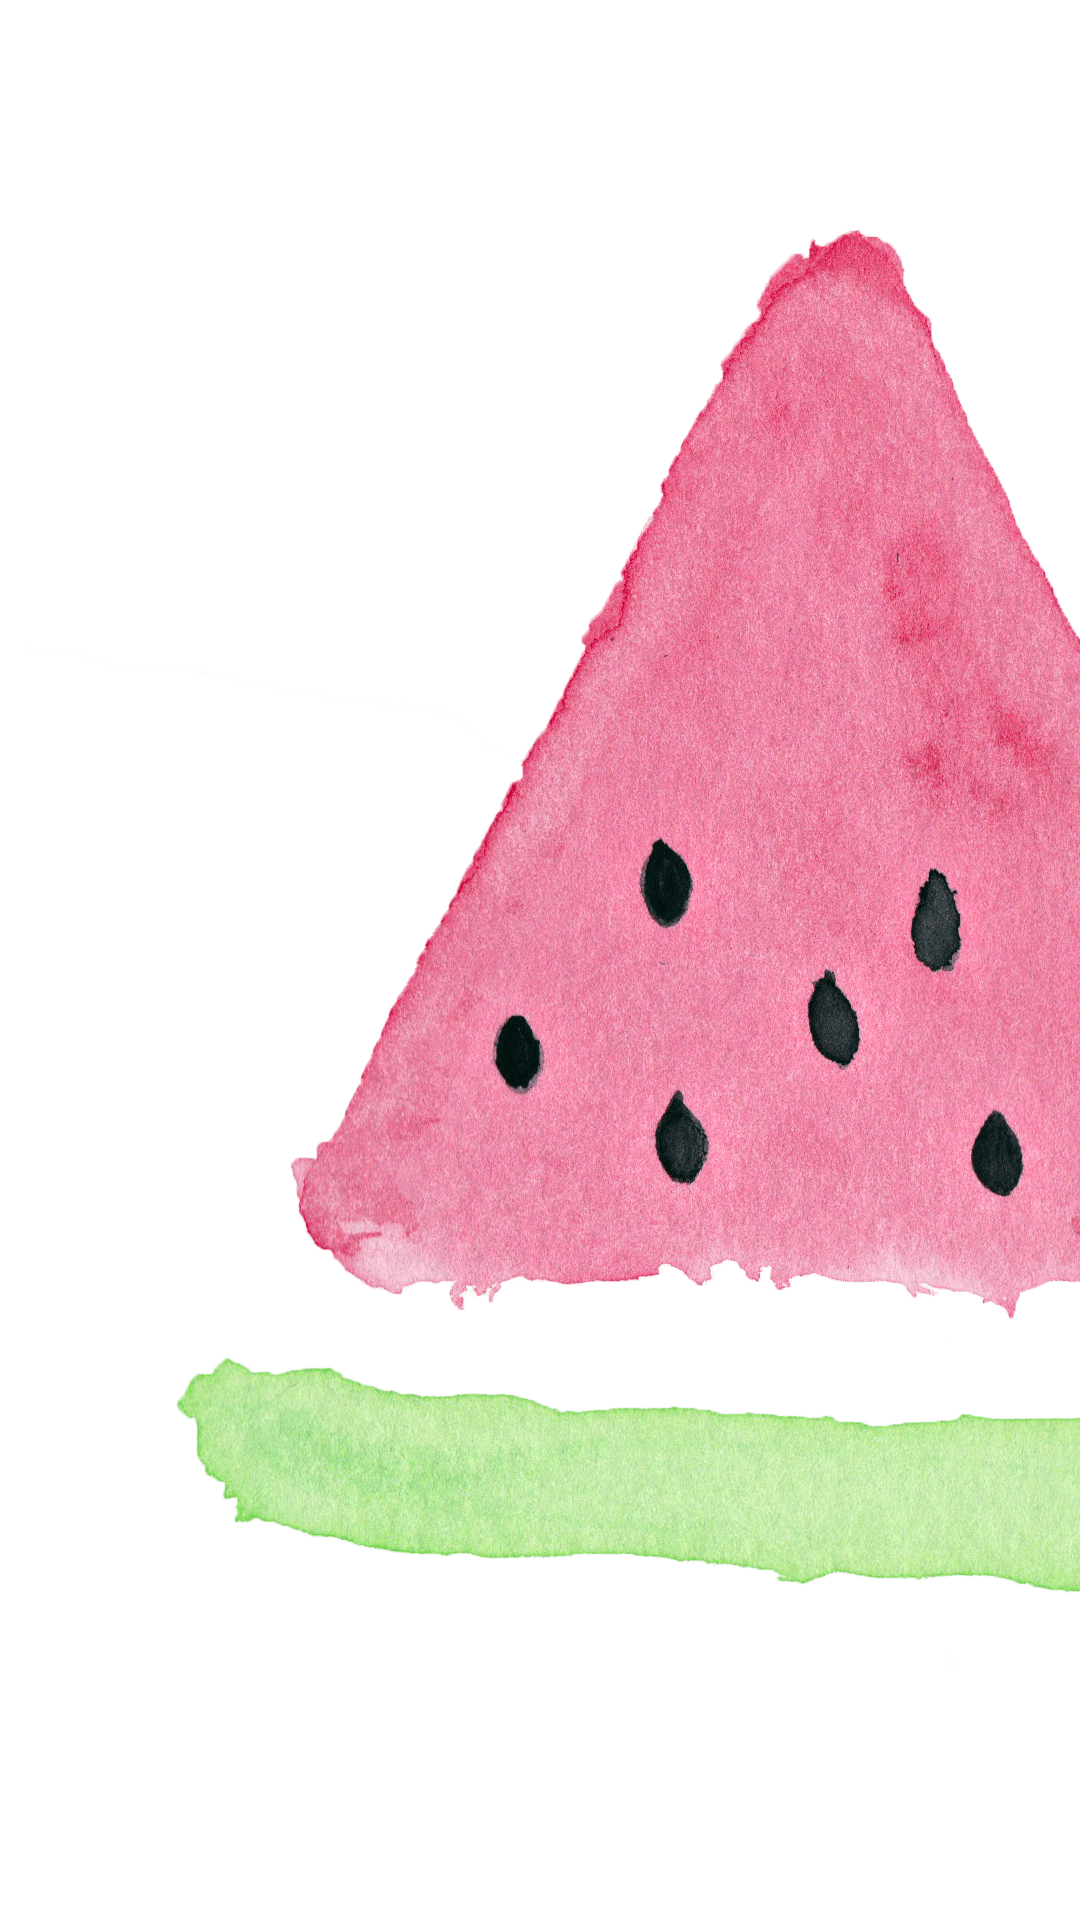 Watermelon Hand Painted Android Wallpaper free download